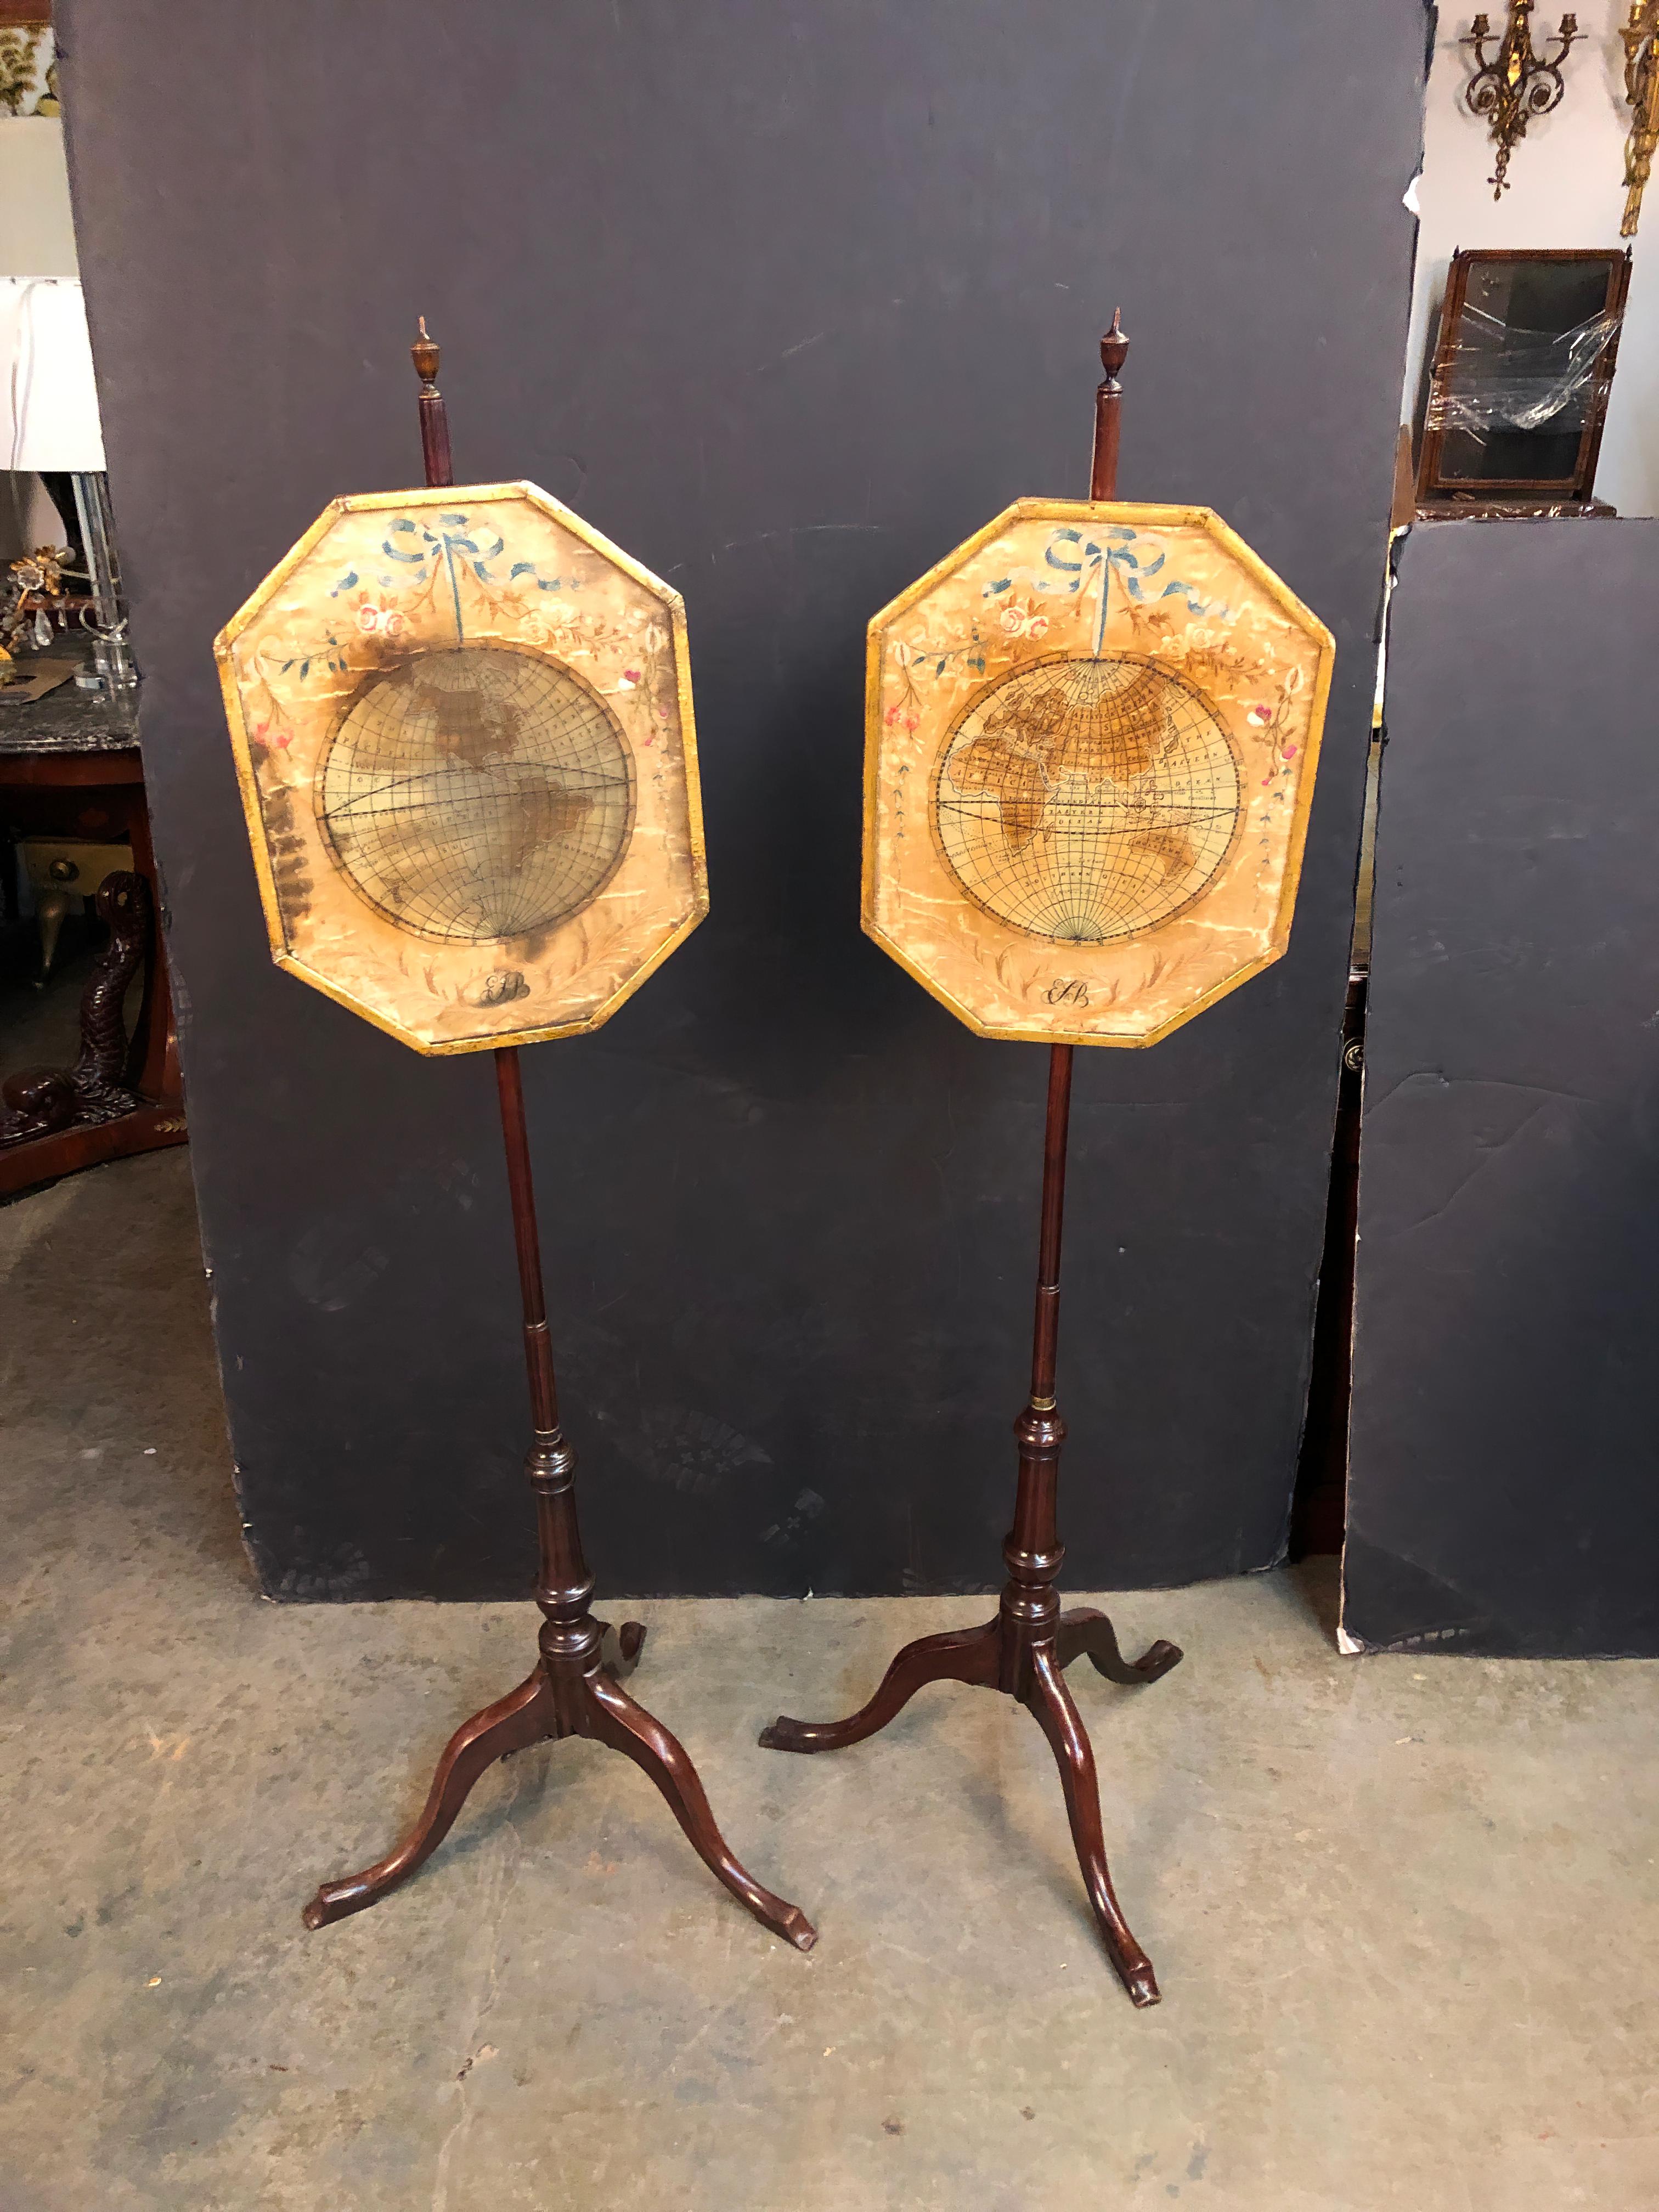 A rare pair of Queen Anne mahogany pole screens with urn finials and embroidered silk work depicting the eastern and western hemispheres of the world as of the 18th century. 
Possibly American.